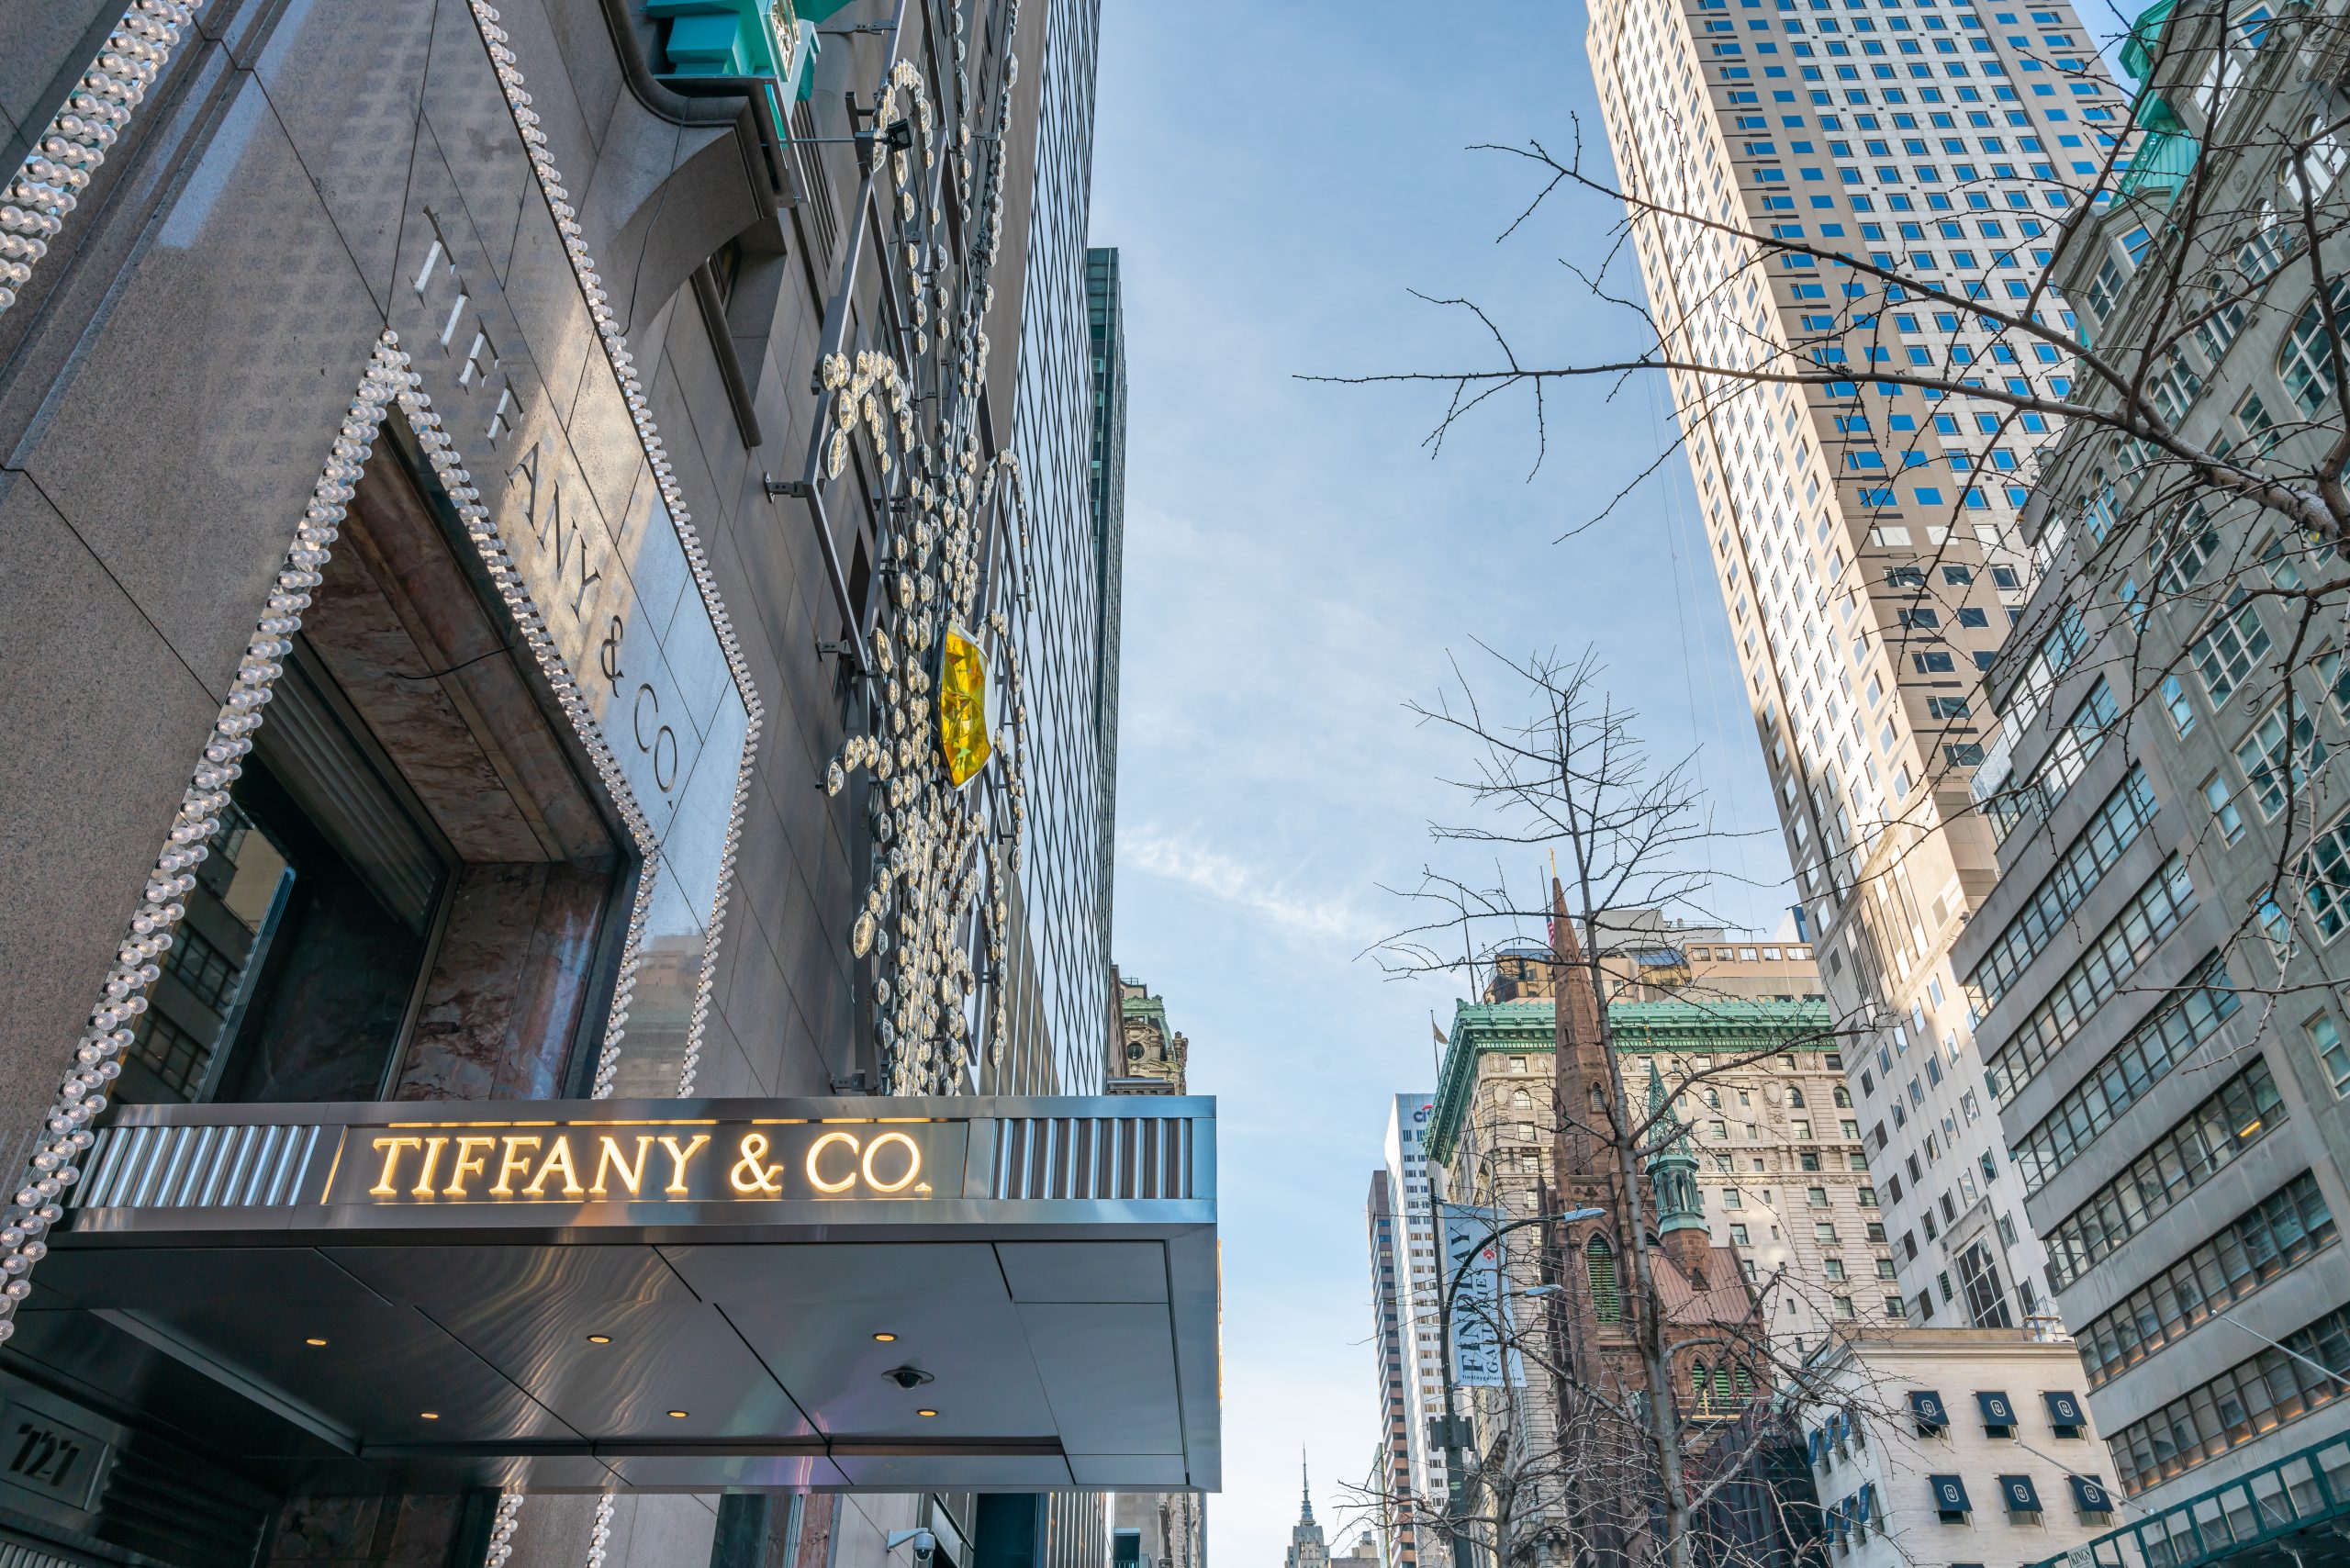 The impact of the acquisition of Tiffany & Co. on the financial